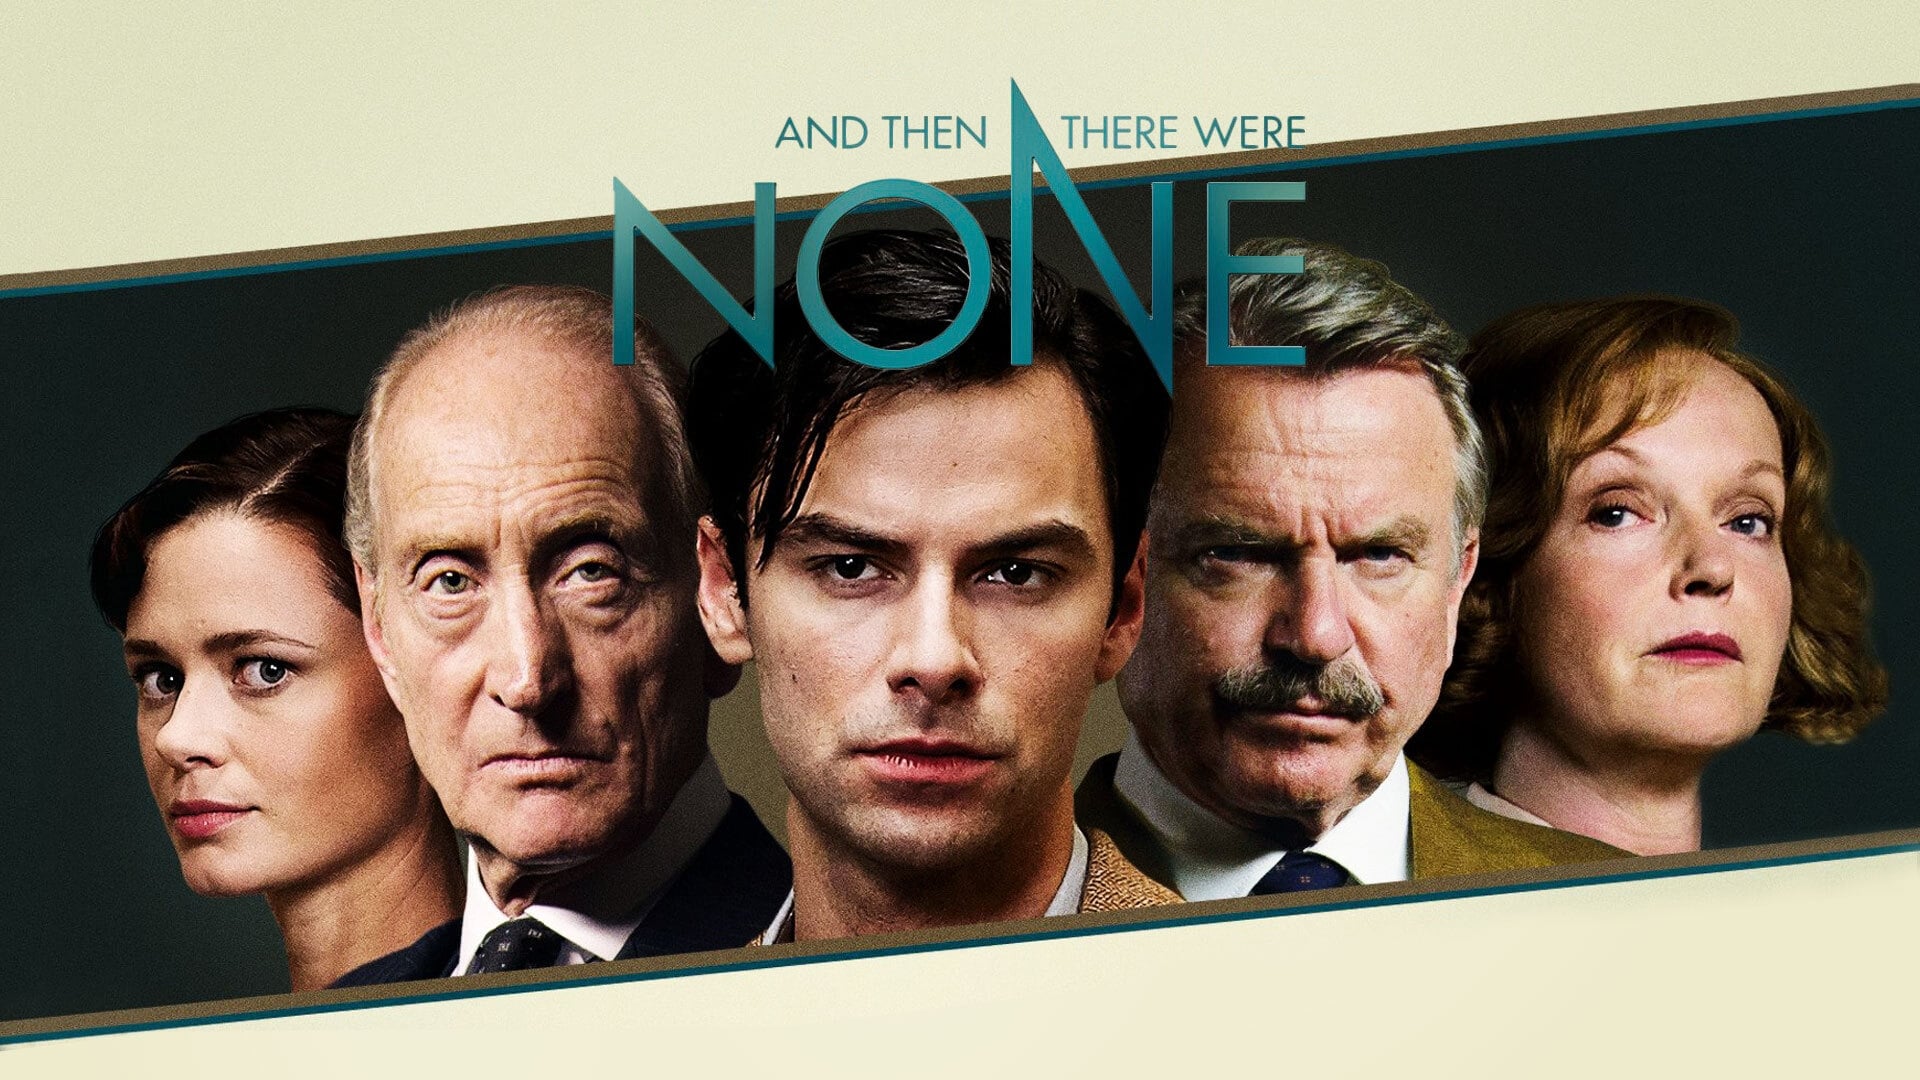 general macarthur and then there were none game